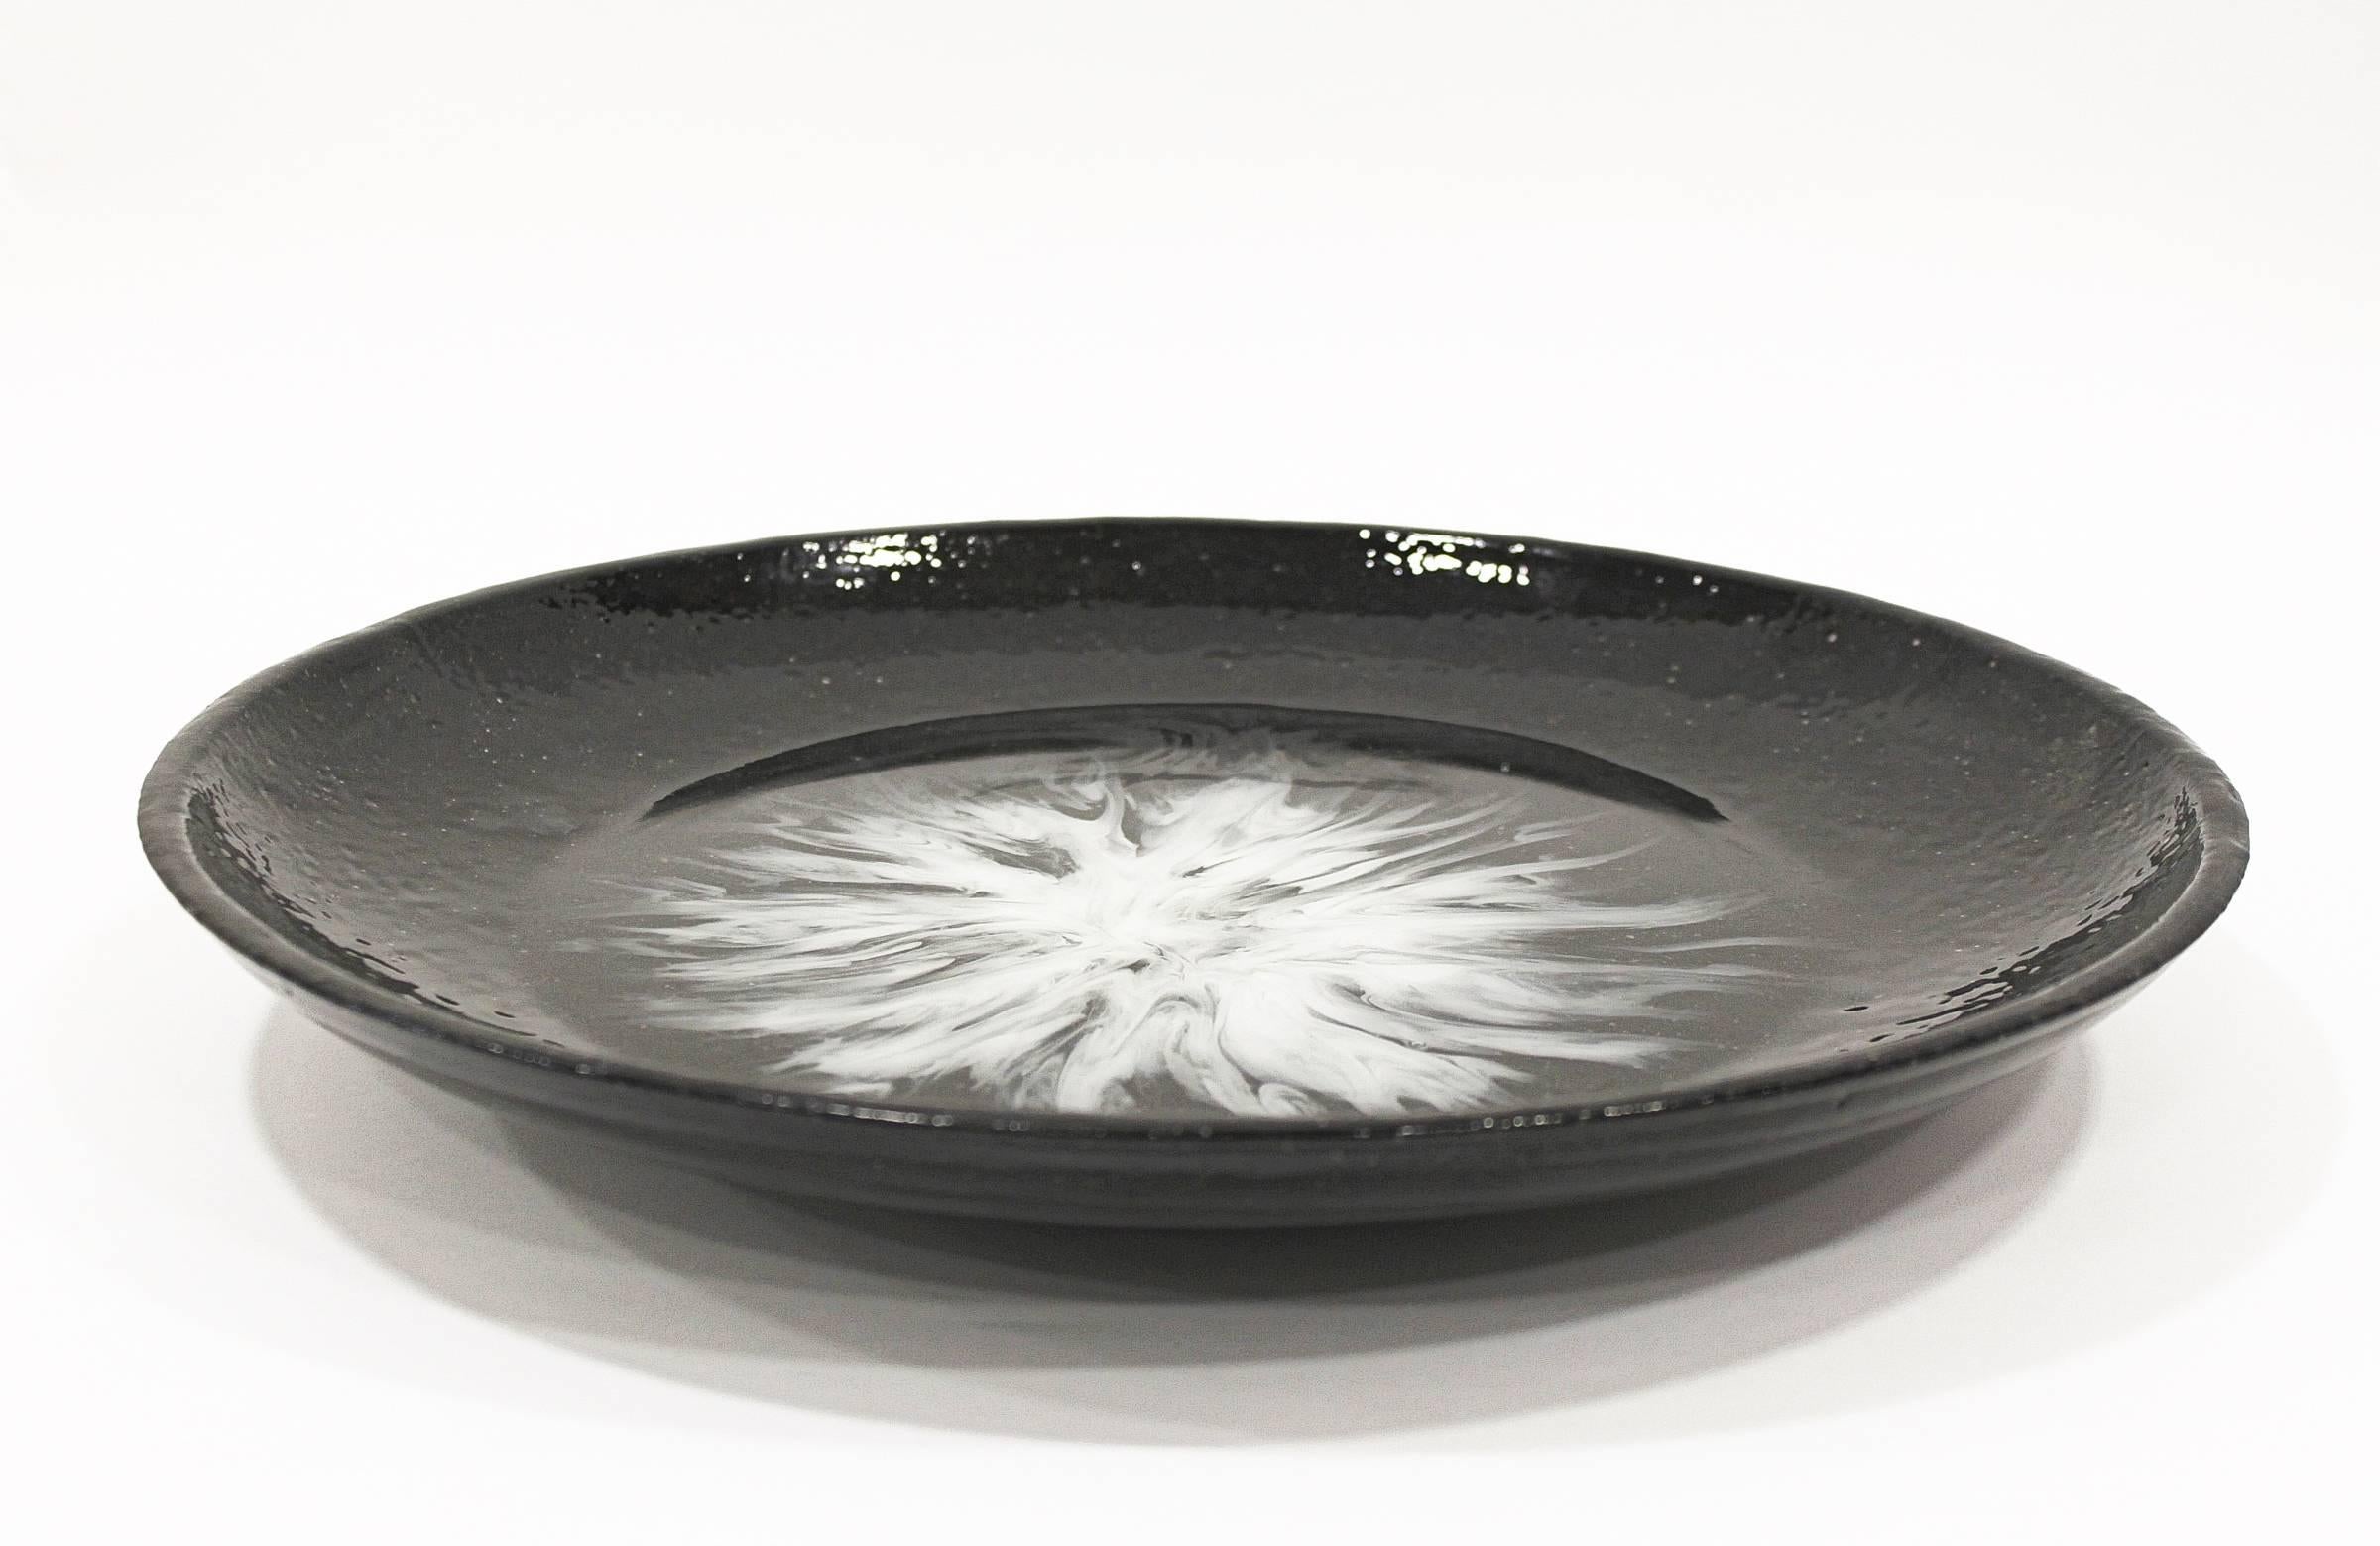 Handcrafted resin platter part of Viscosity Art & Resin Gallery home decor collection.
Made exclusively from resin and decorated with resin chromatography, this platter is a unique piece of art.
Total black, with a flowery white centre that